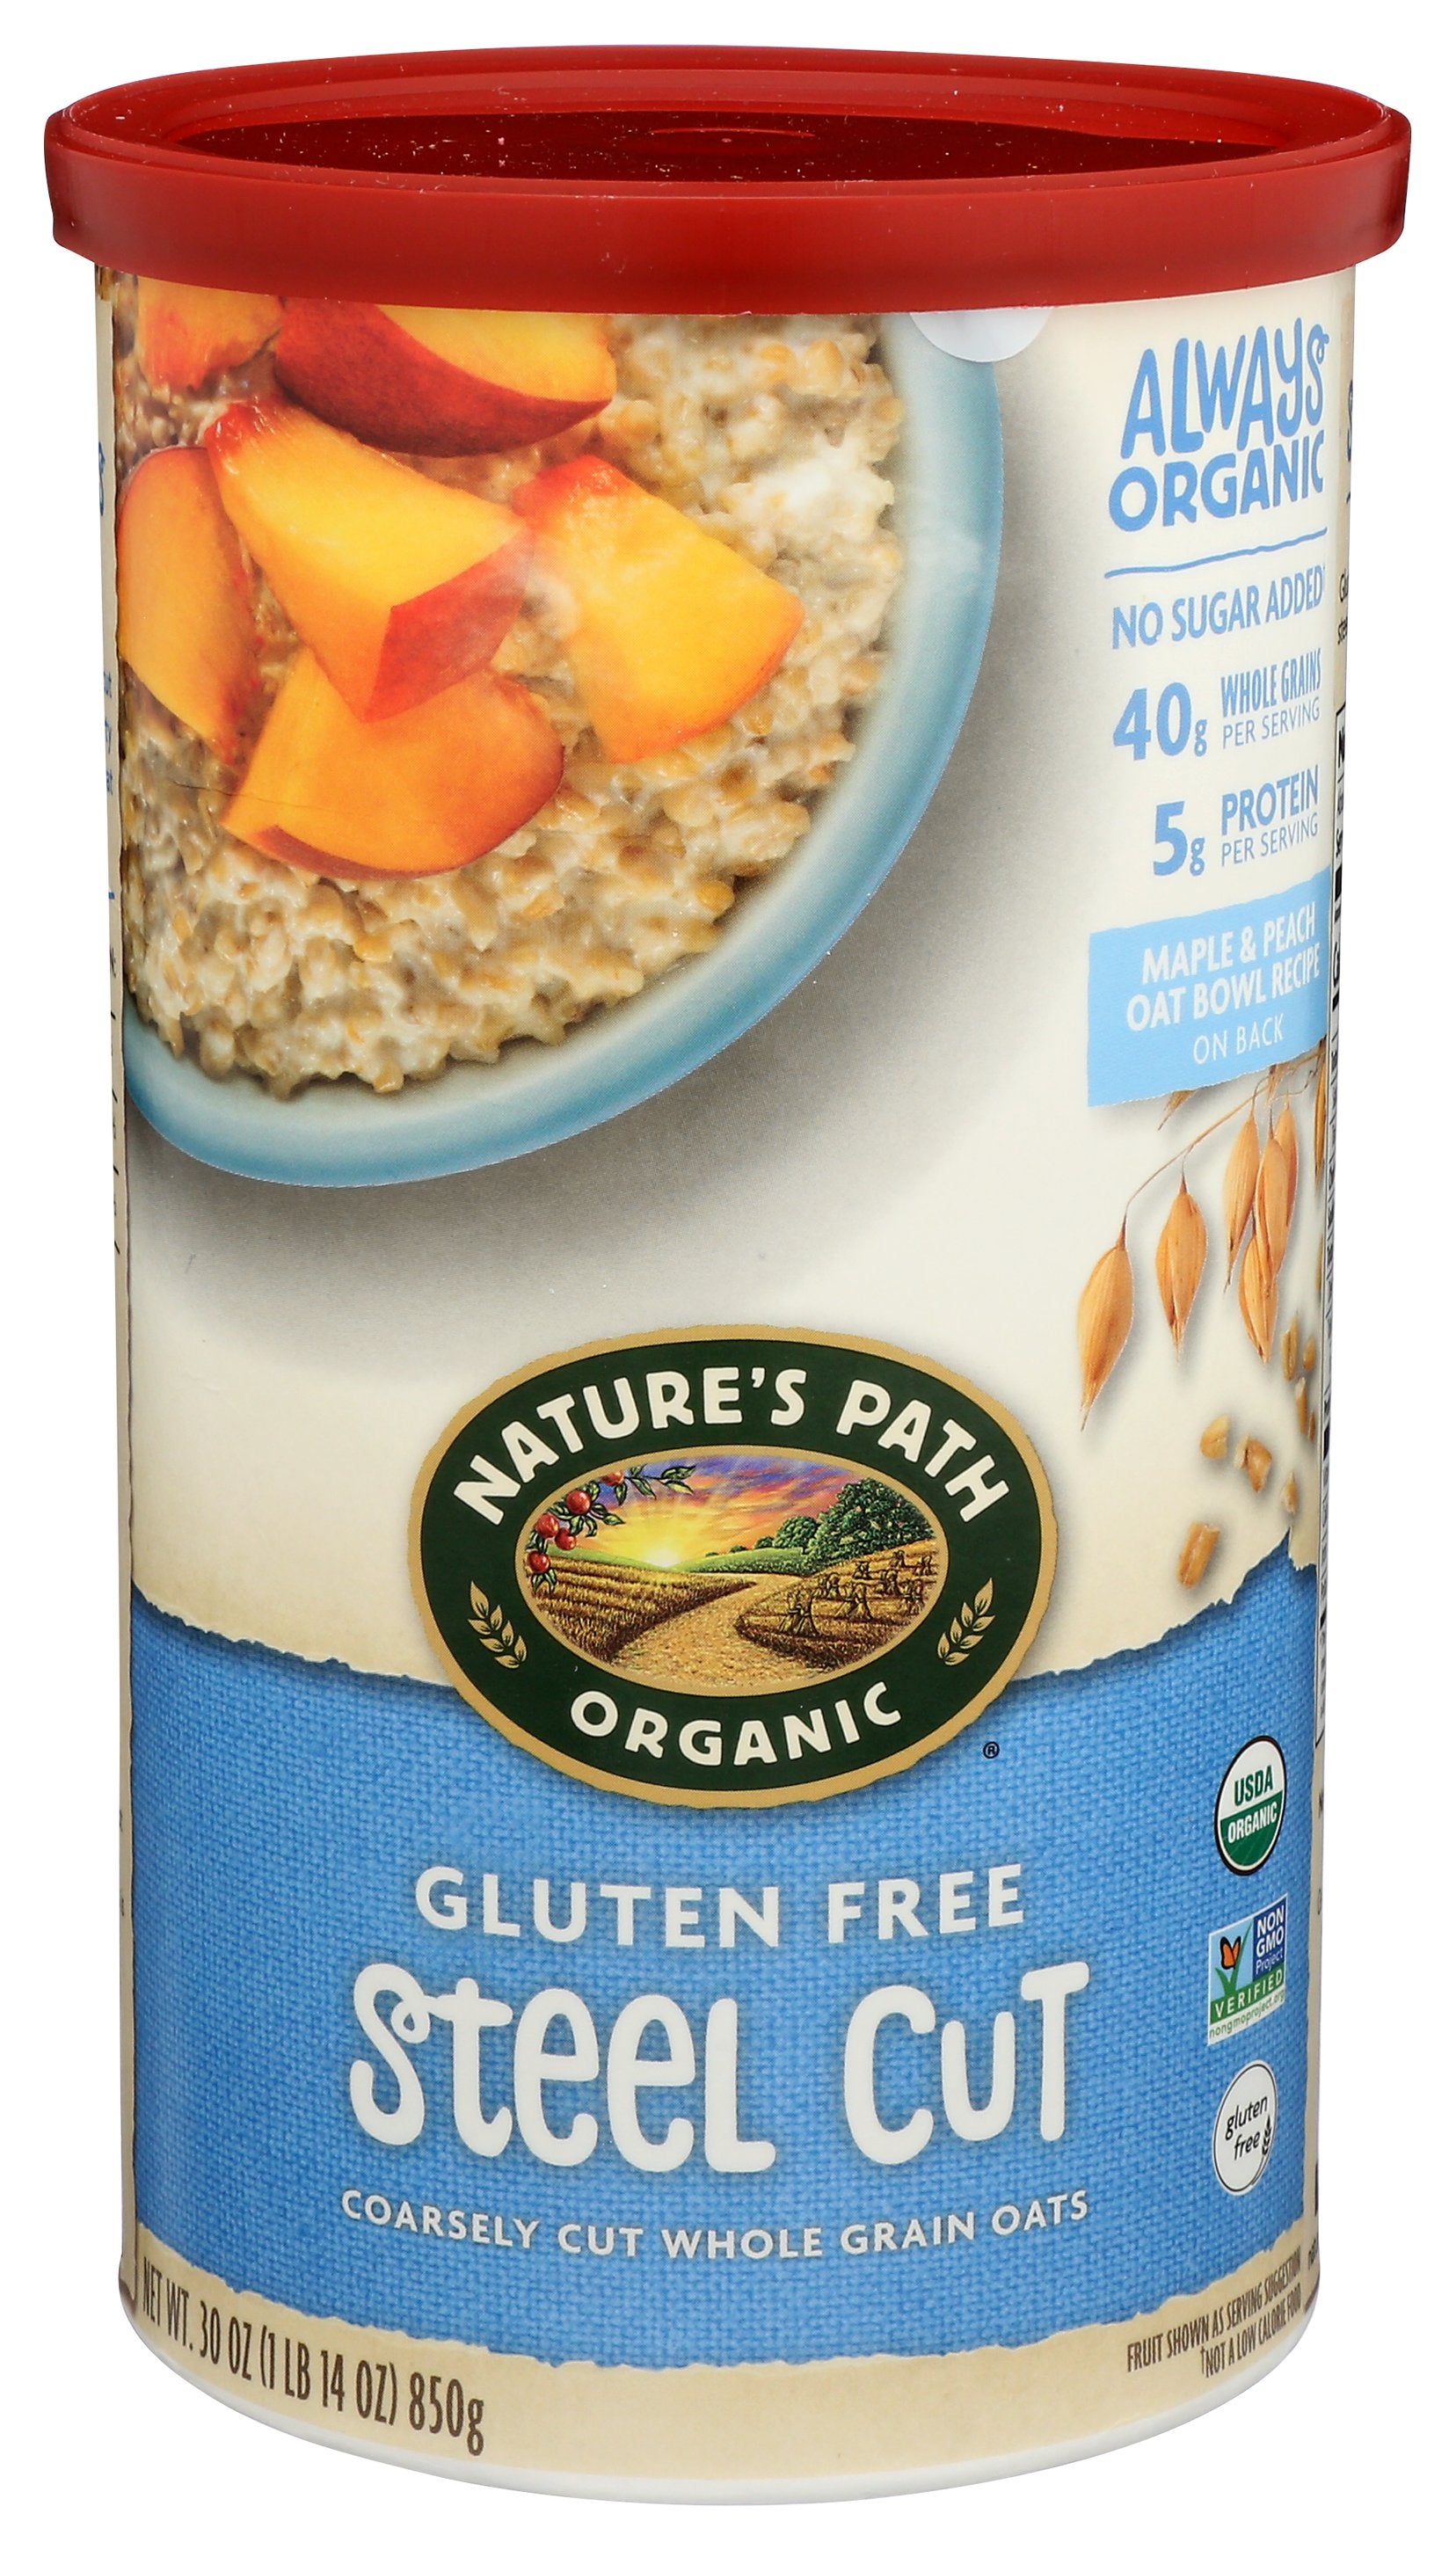 NATURES PATH OATS STEEL CUT ORG - Case of 6